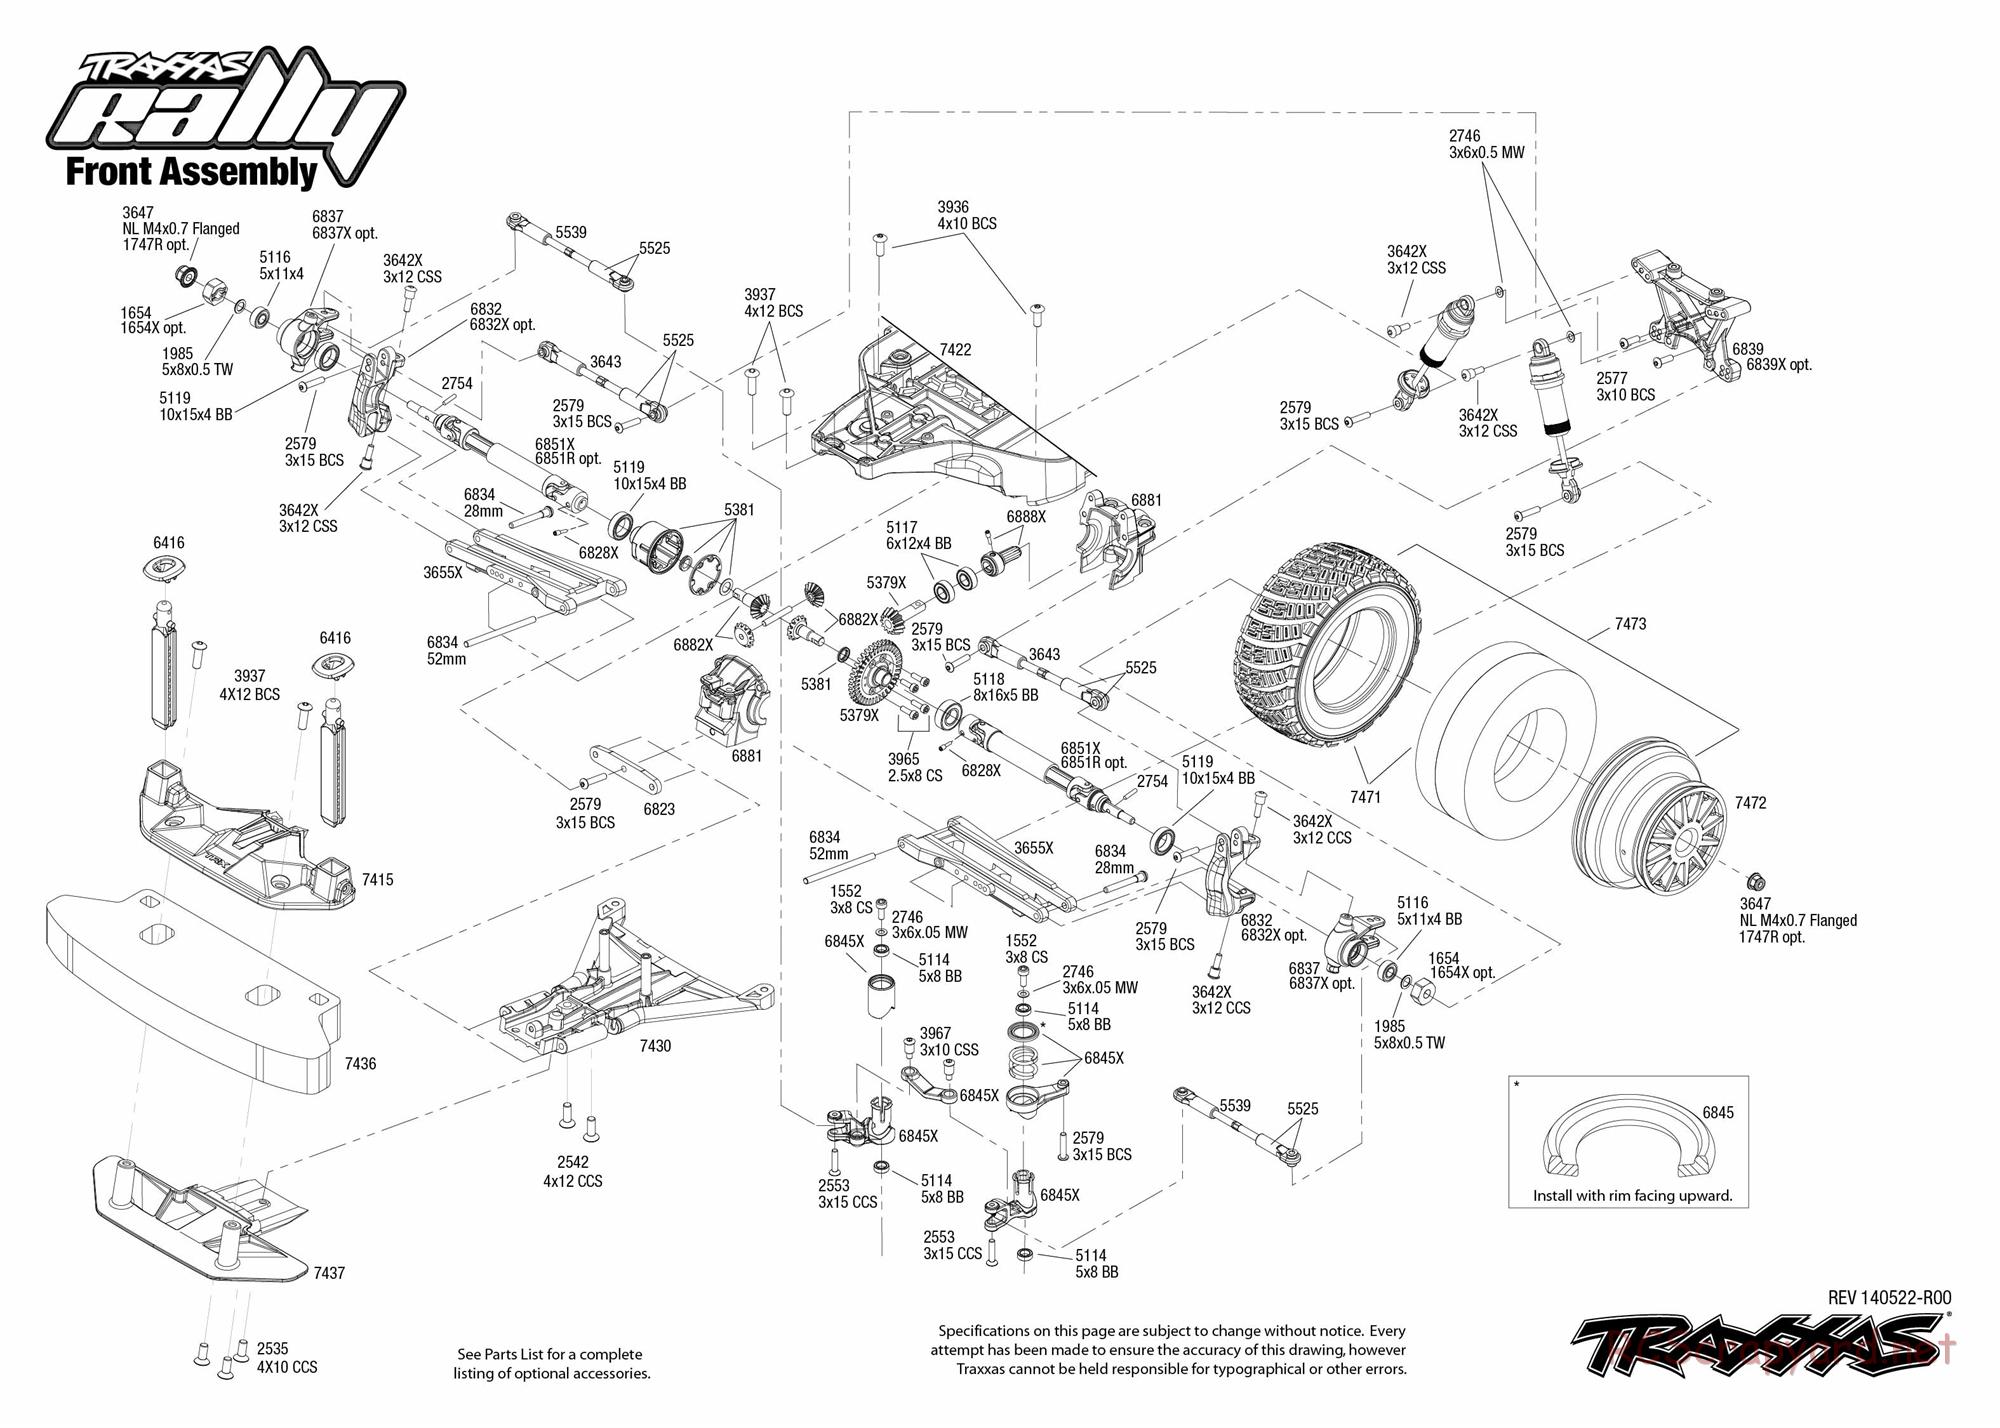 Traxxas - Rally (2014) - Exploded Views - Page 3